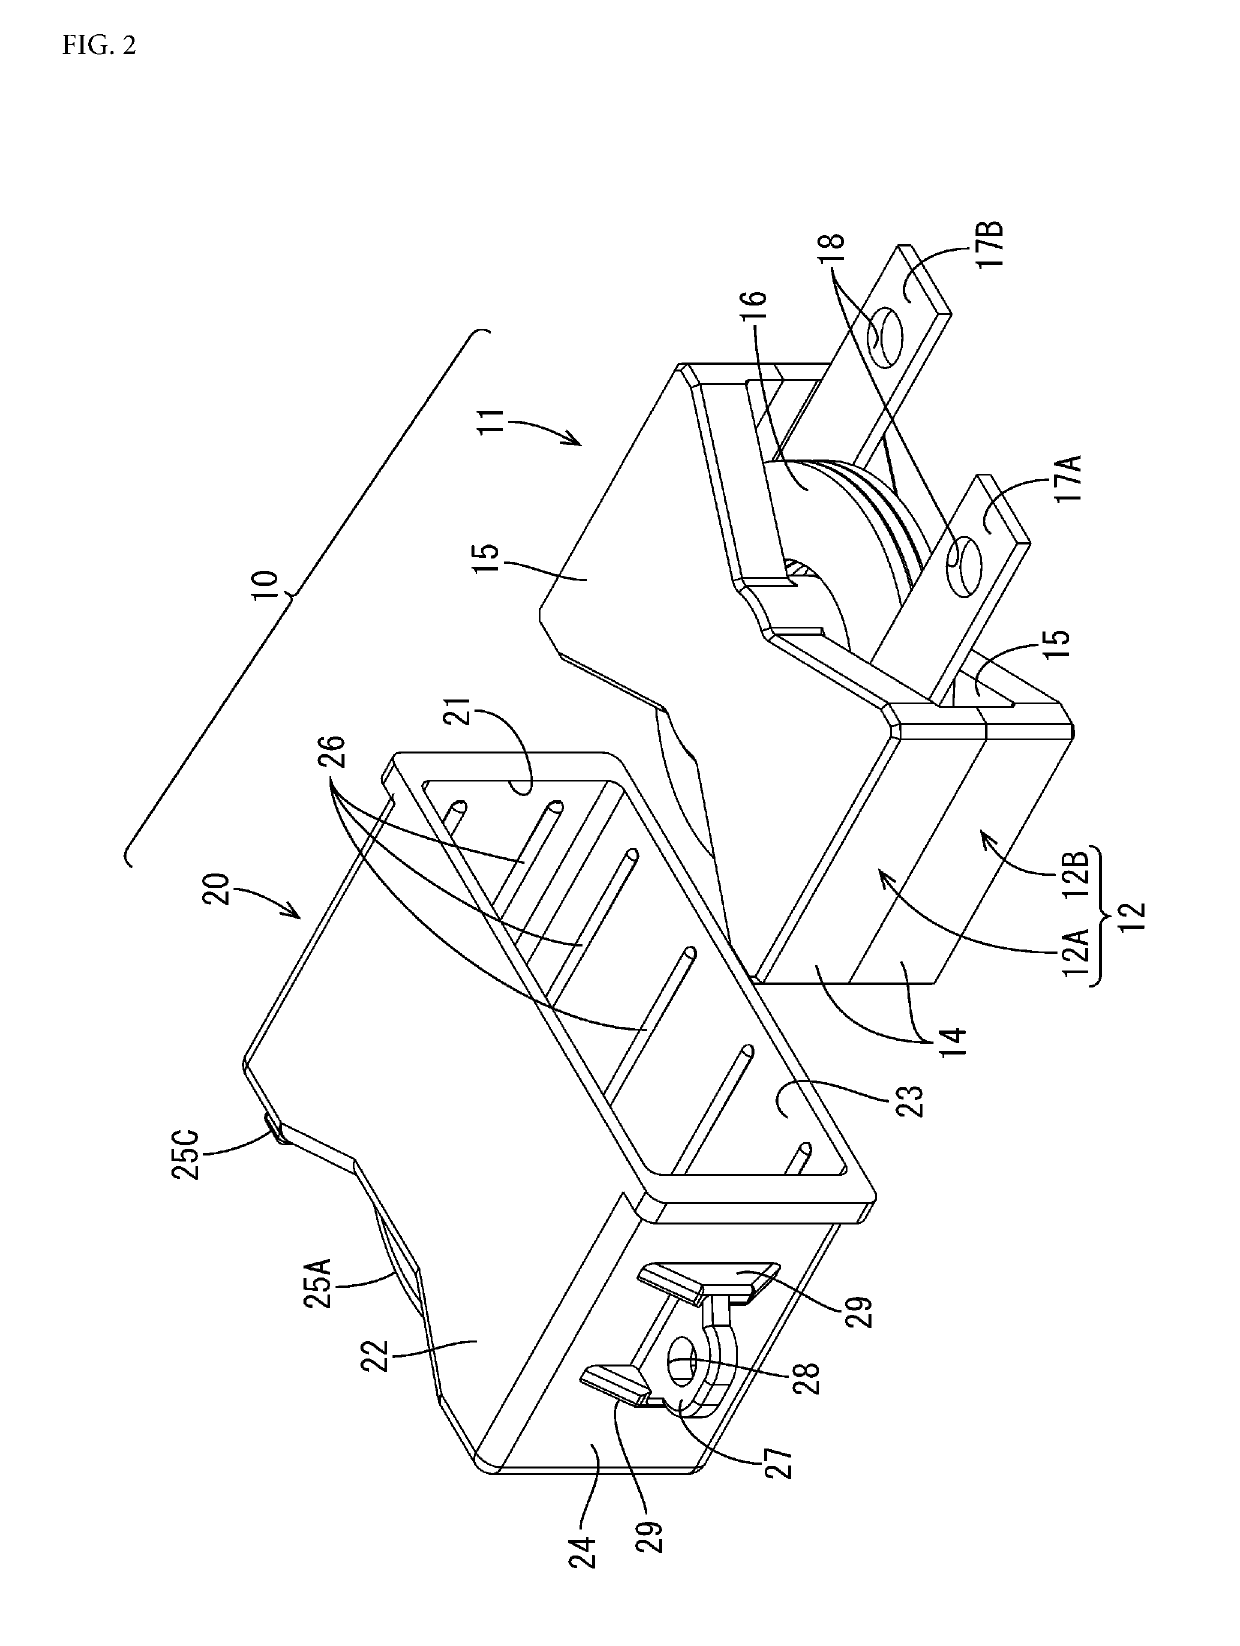 Coil assembly, structure for attaching coil assembly, and electrical connection box